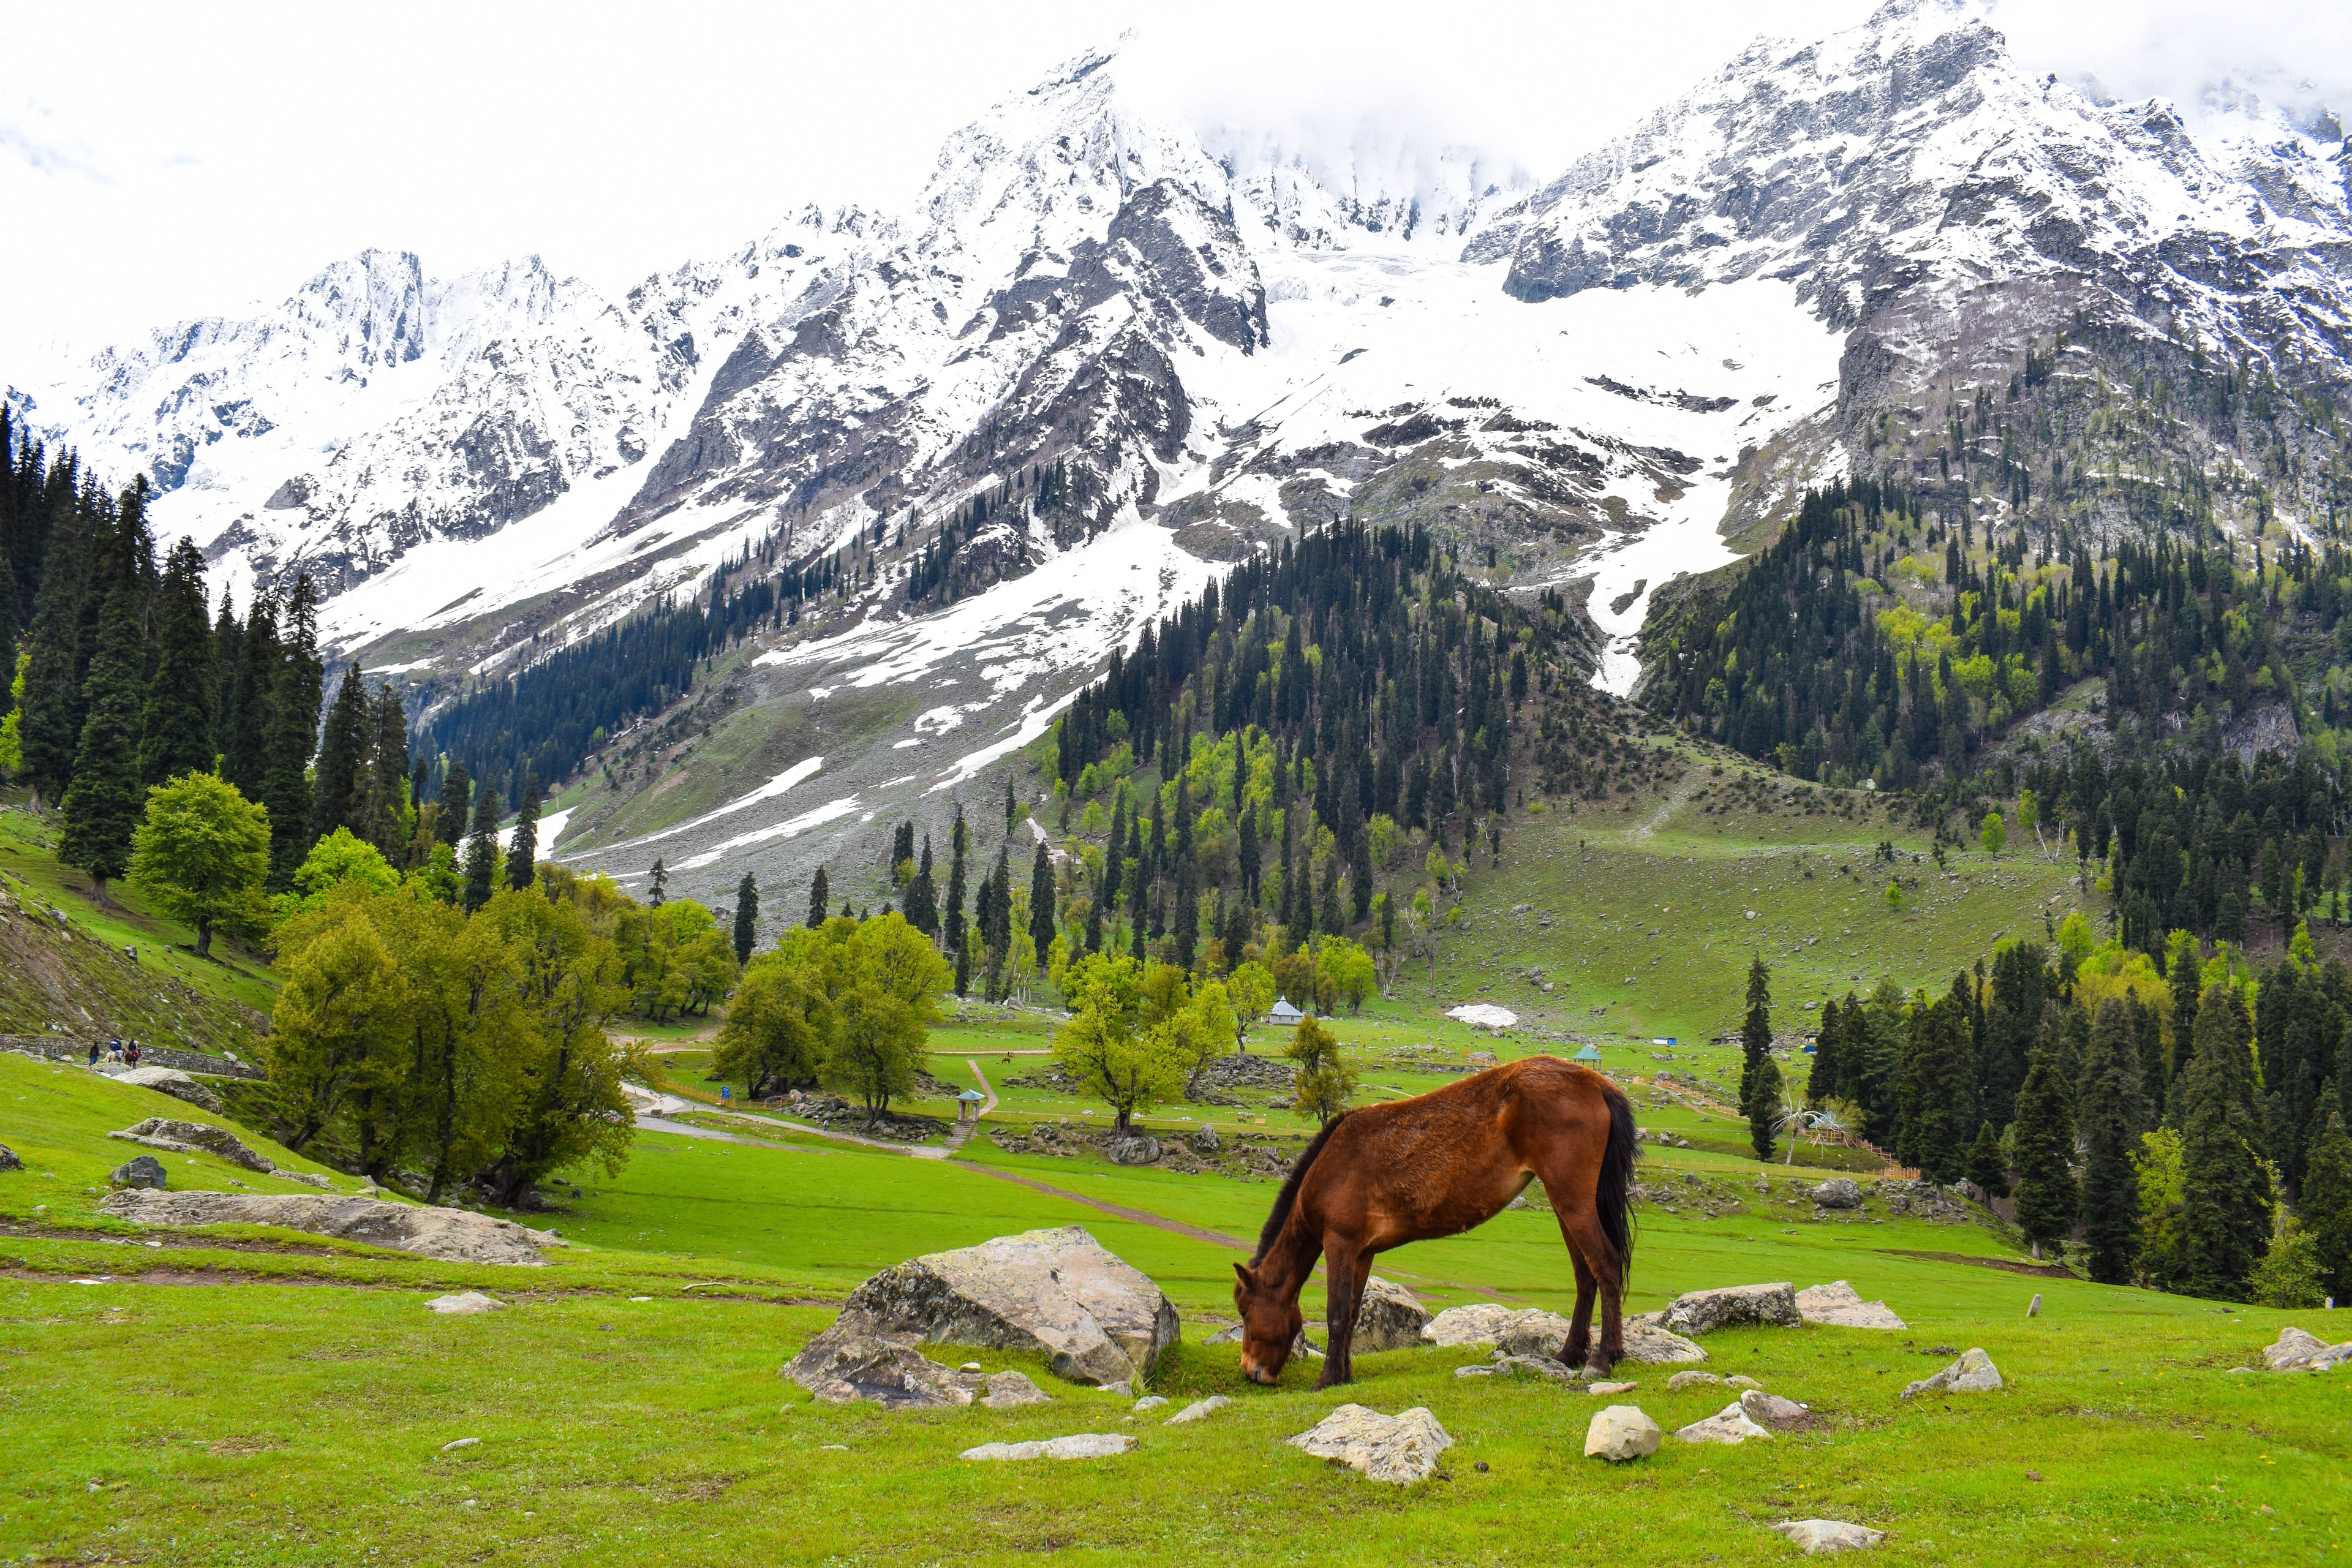 Hotels in Pahalgam - A Perfect Getaway In The Lap of Nature